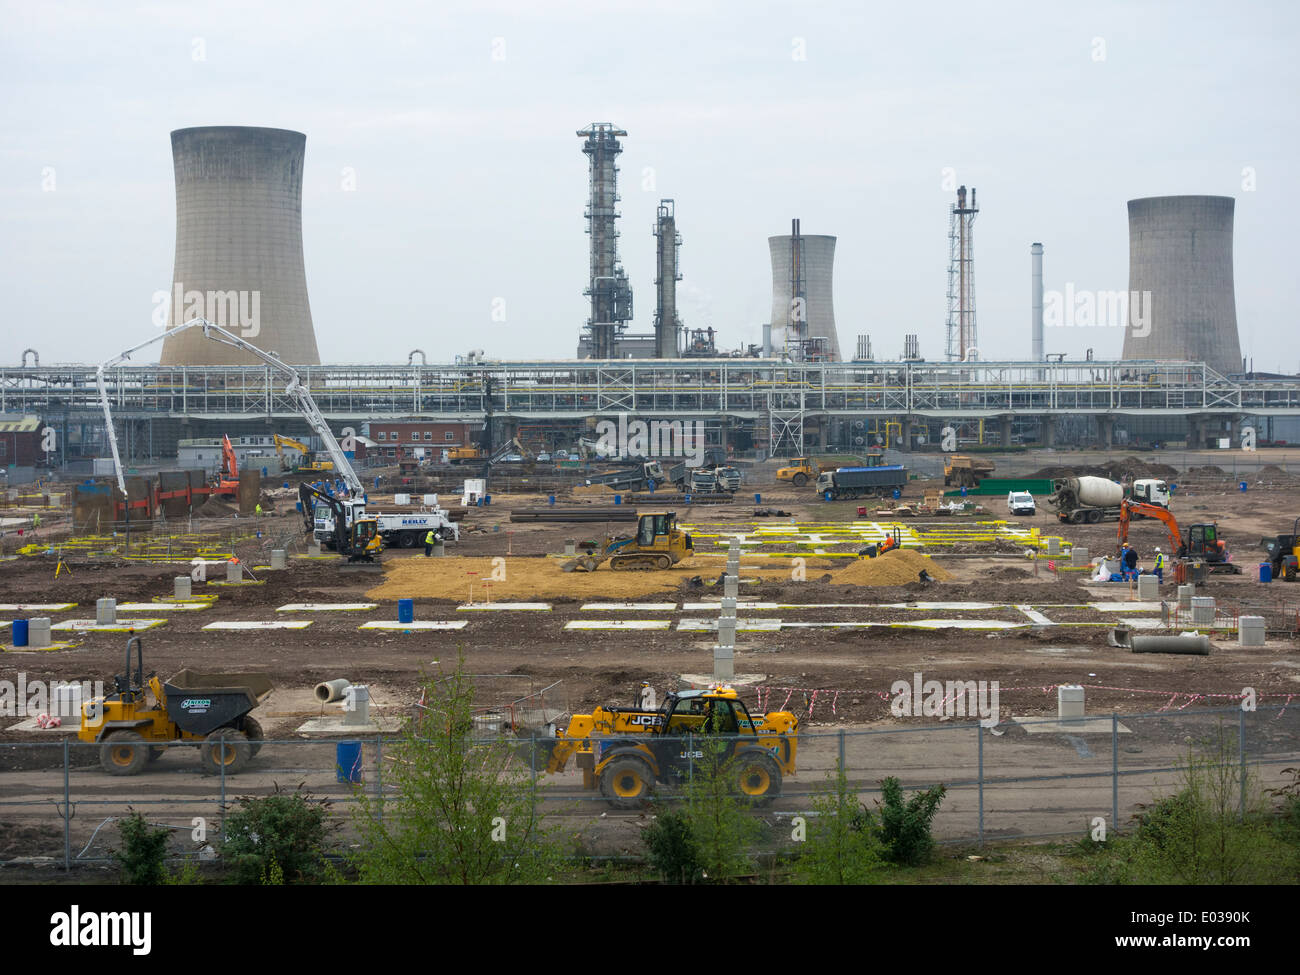 Construction of a new factory for SNF Oil and Gas at Billingham near Middlesbrough,  north east England, United Kingdom. Stock Photo